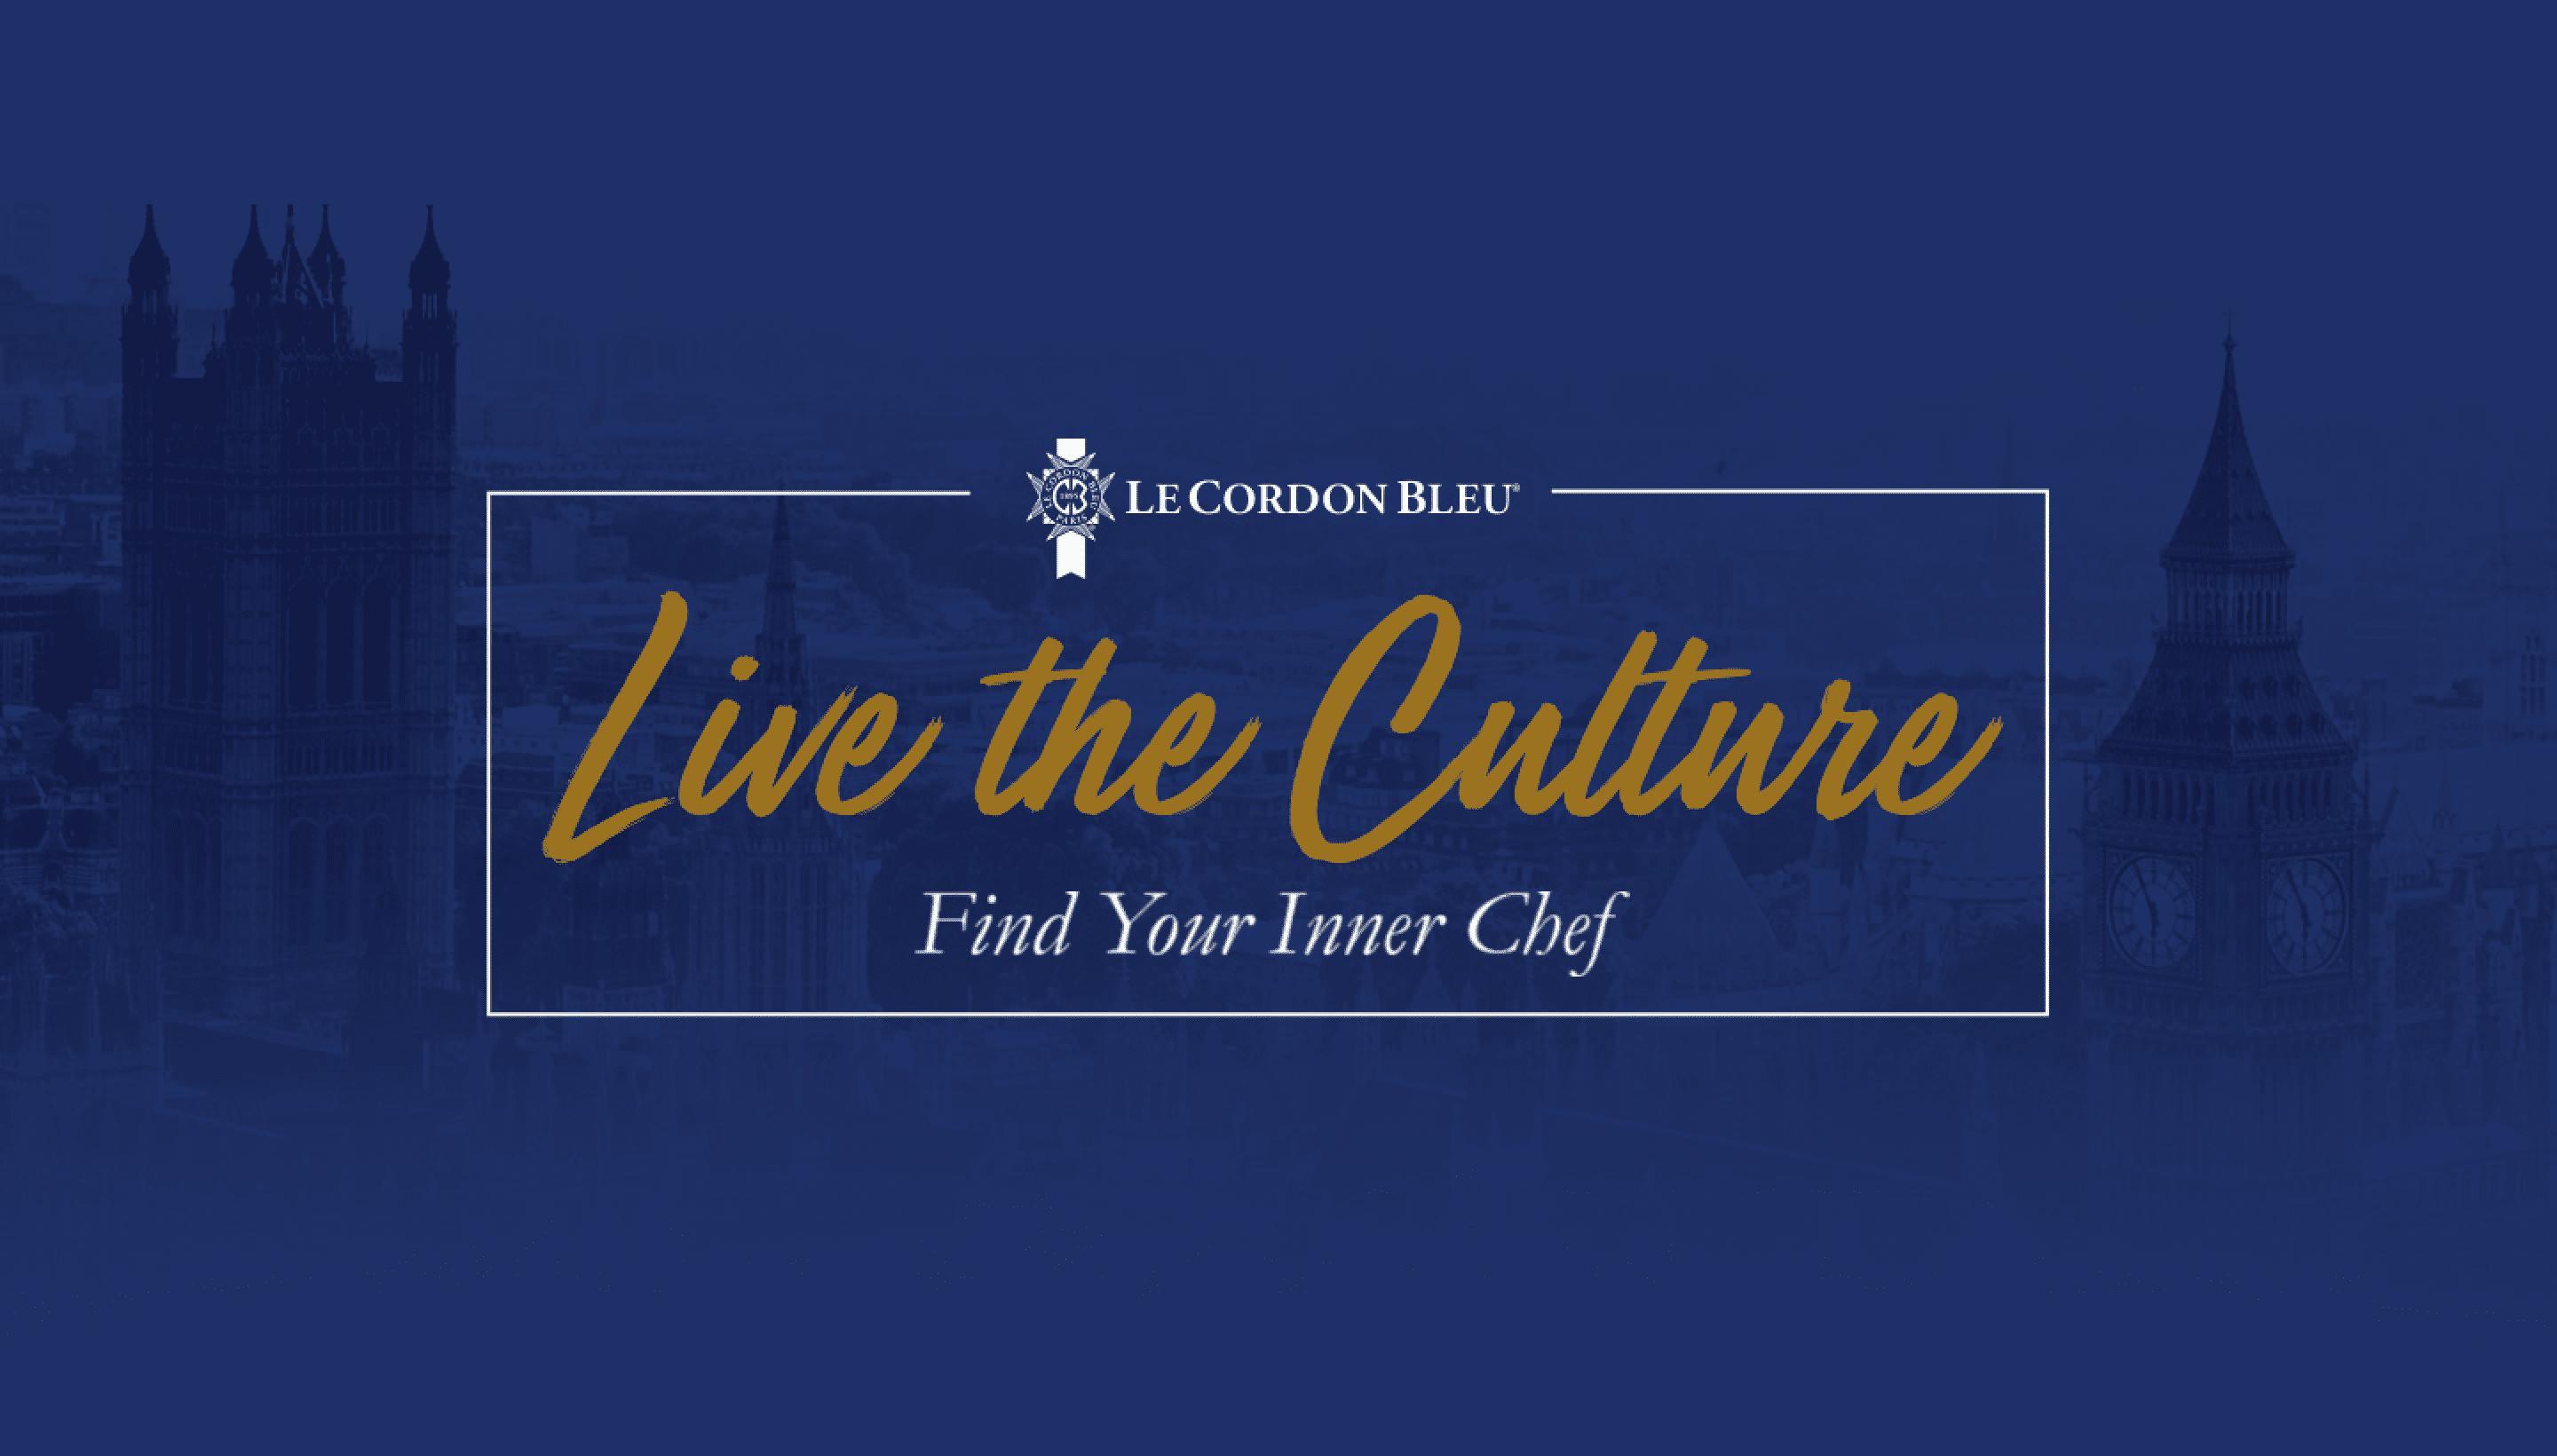 Live the Culture - Find your inner chef